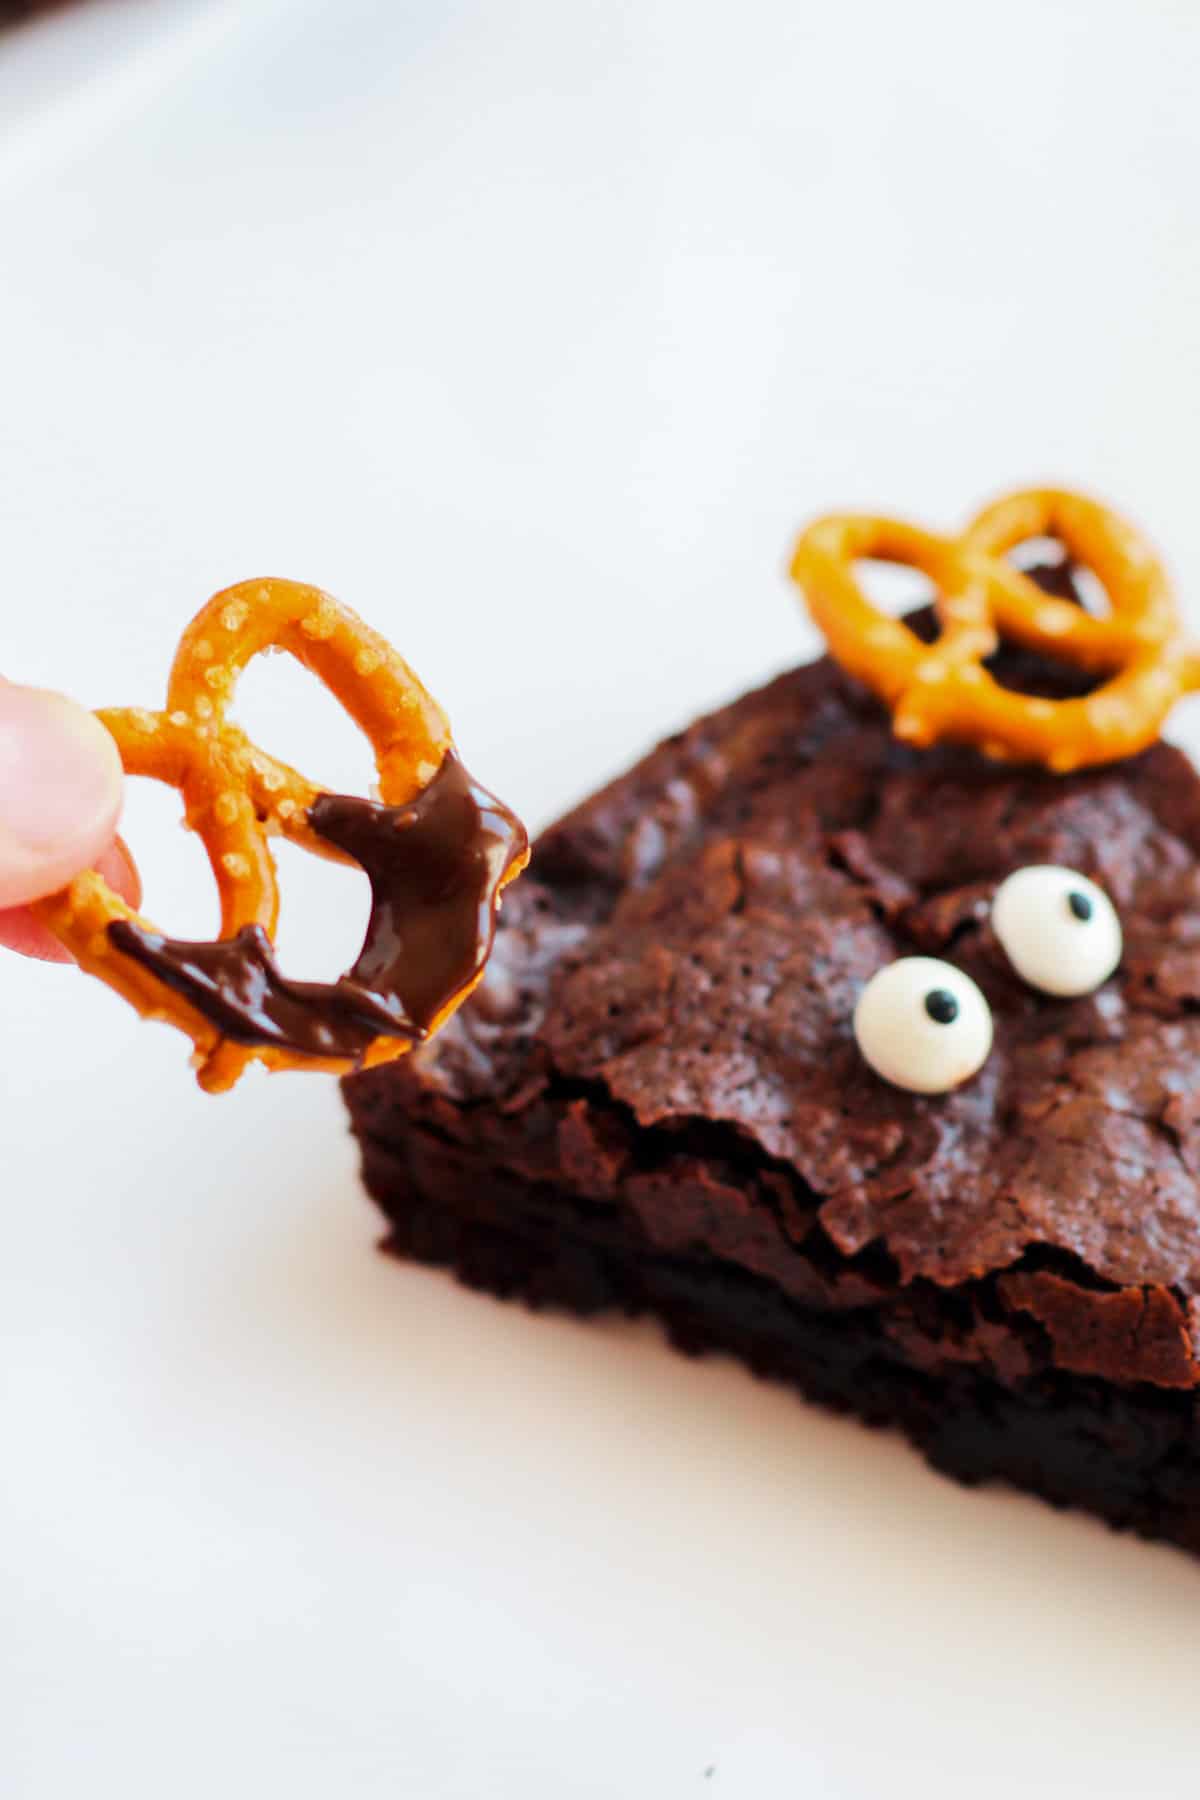 Melted chocolate on pretzel twist, being placed on brownie above eyes.